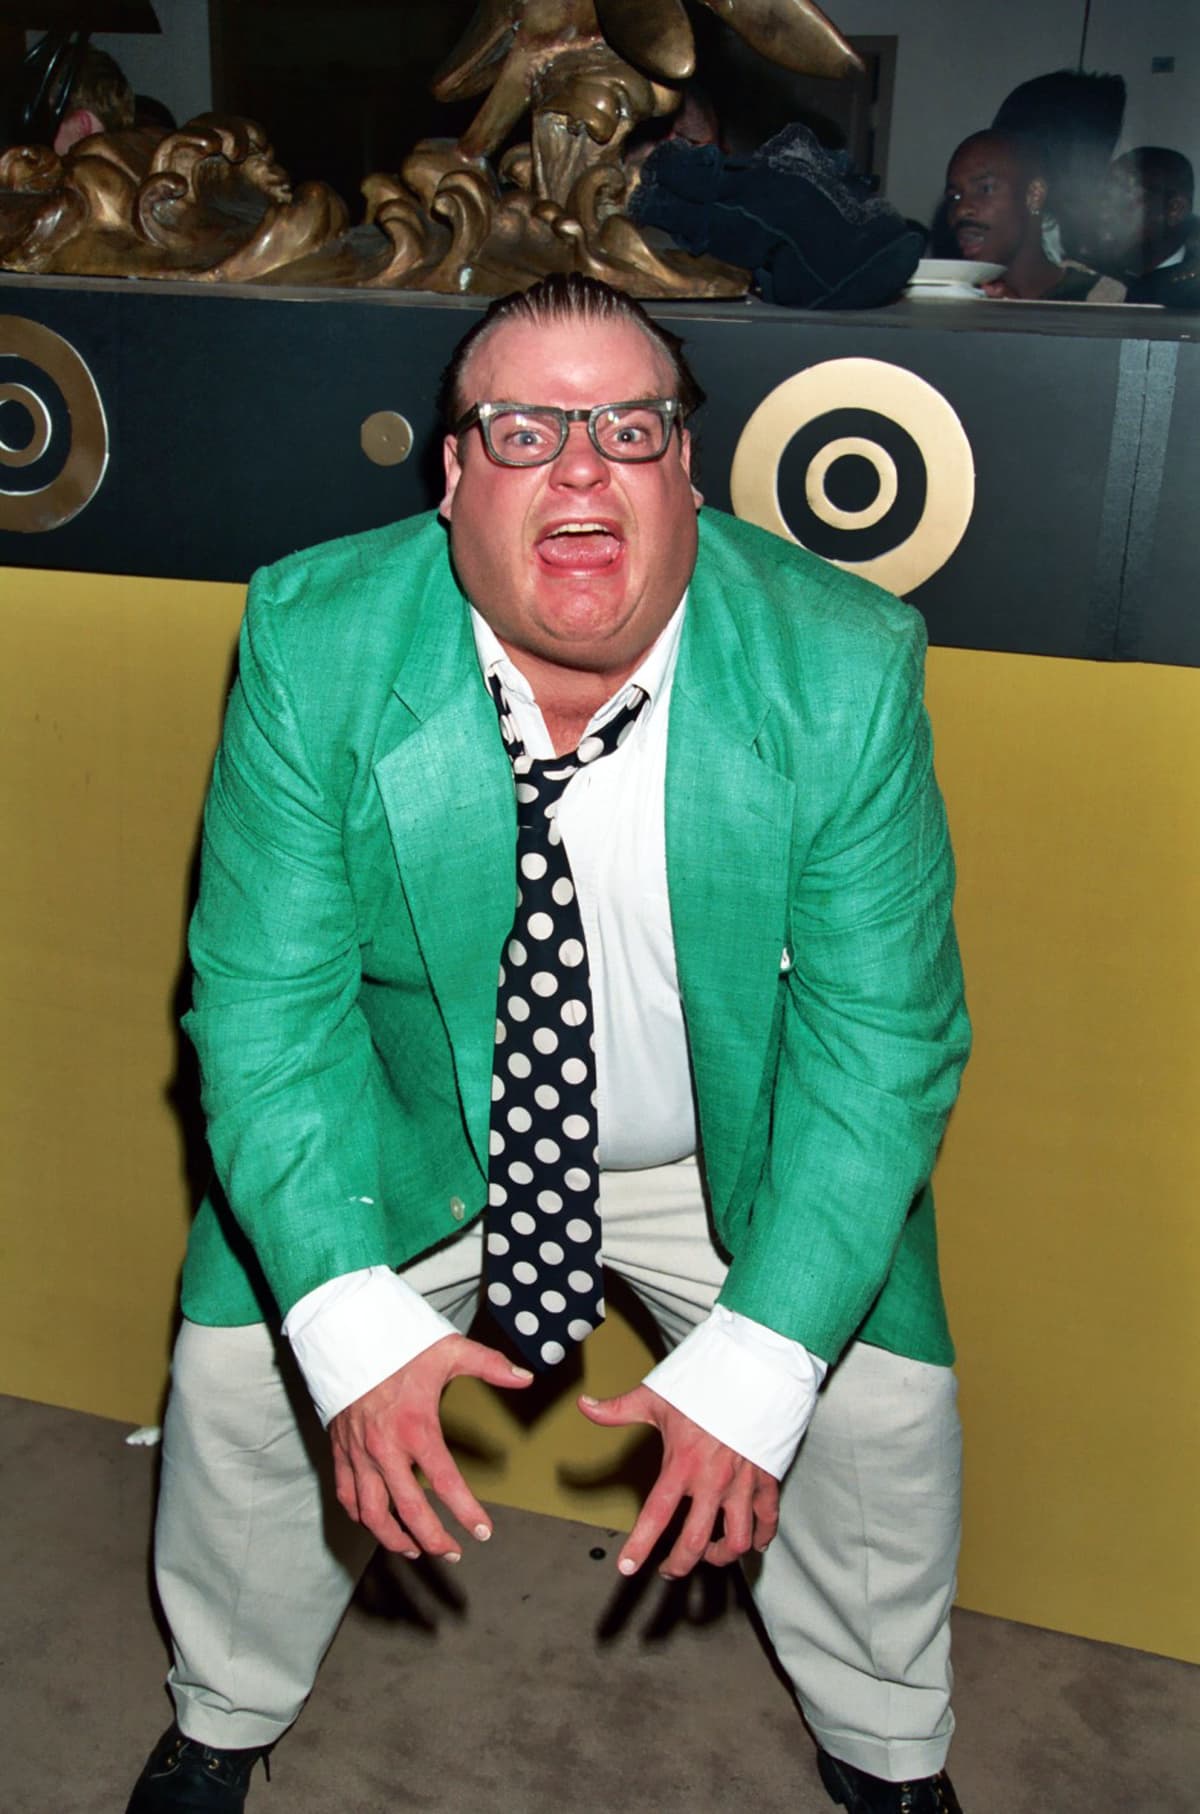 Chris Farley at the Chris Farley by George Pimentel in Toronto, Canada. (Photo by George Pimentel/WireImage)